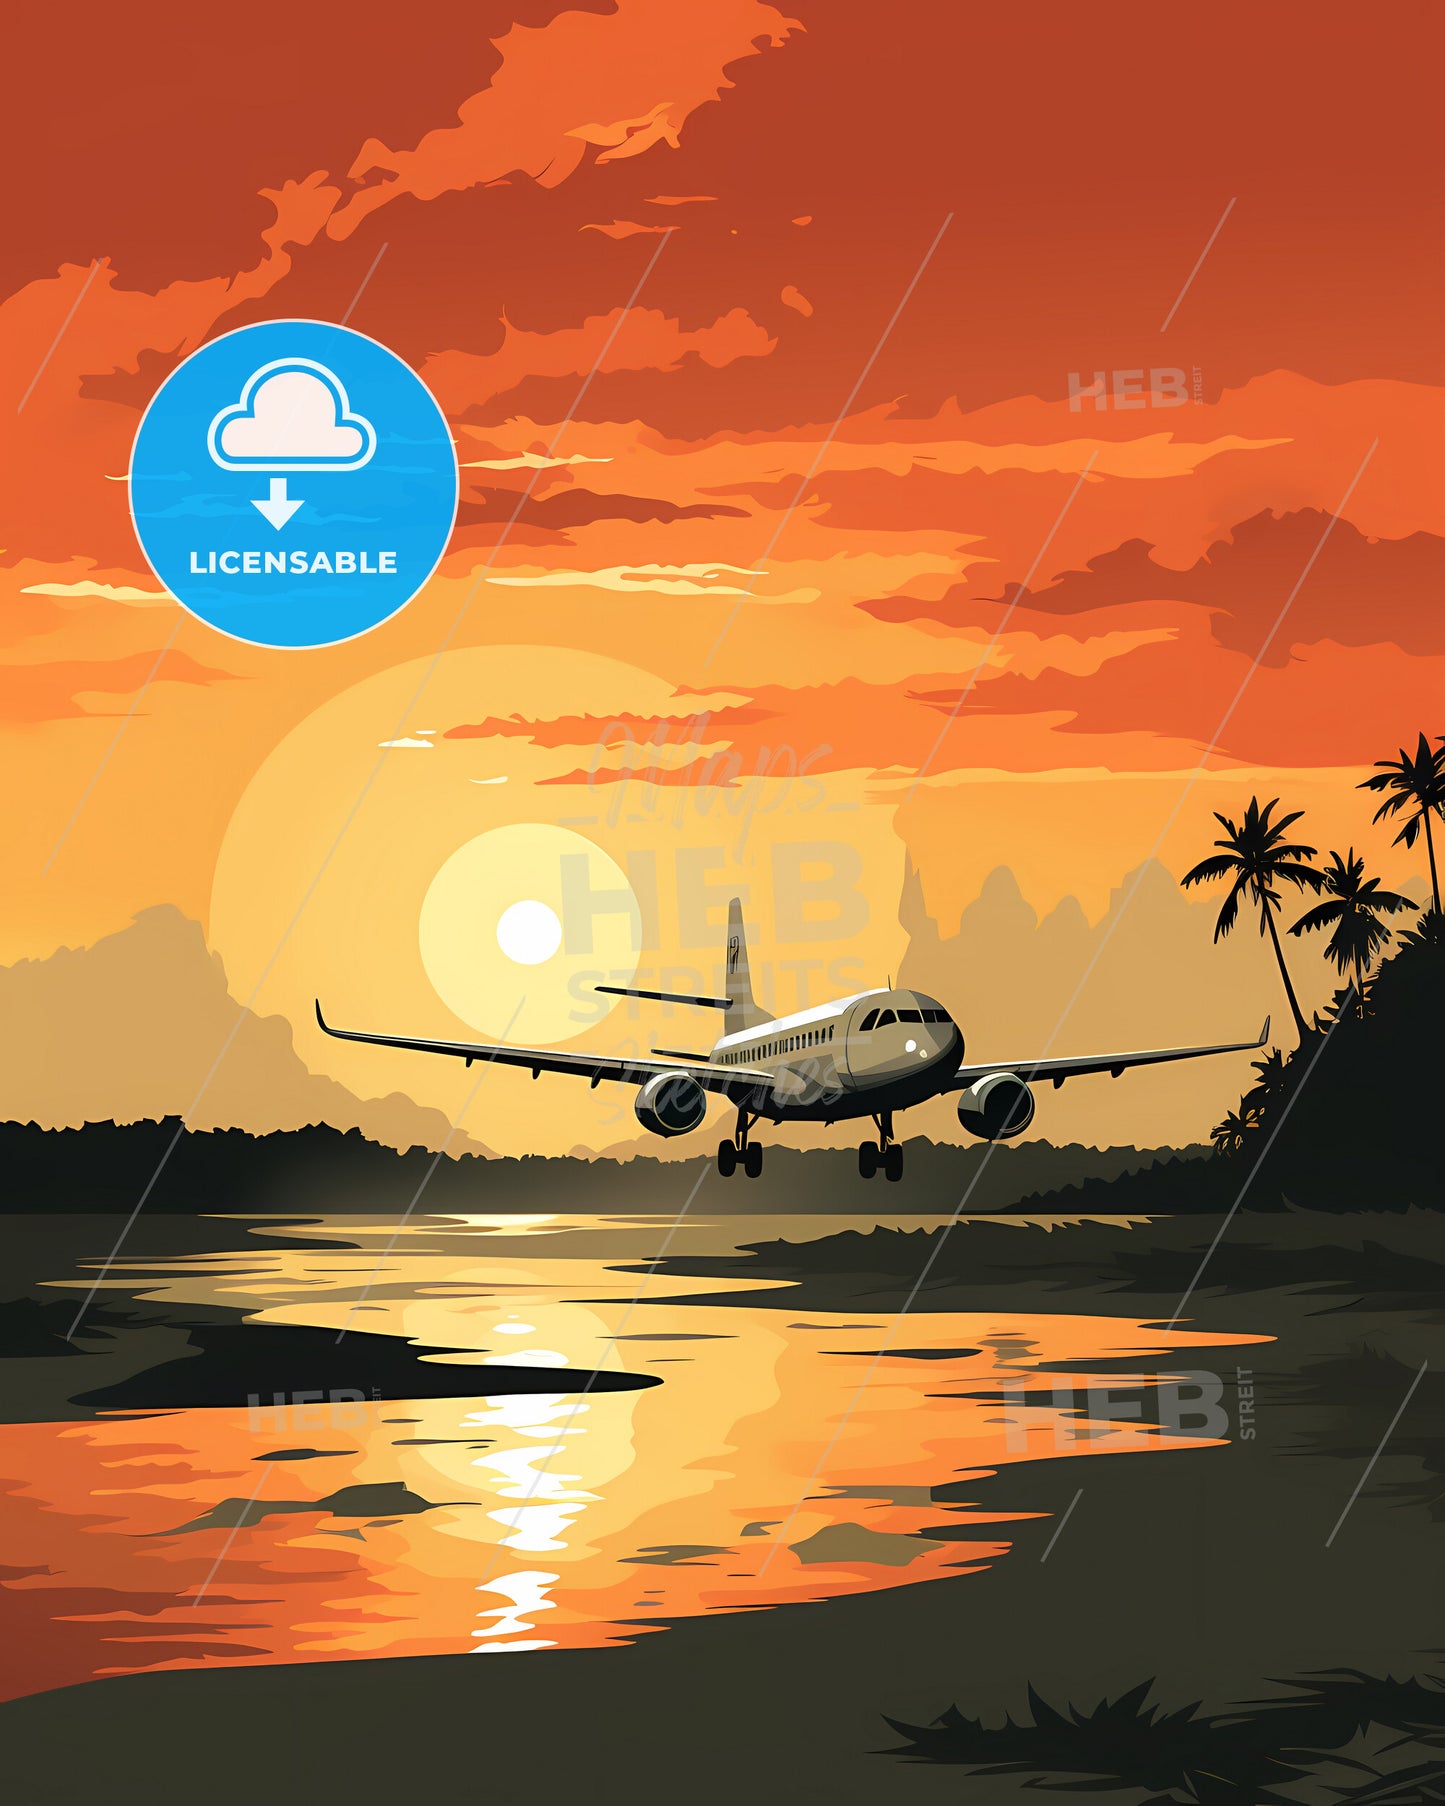 Travel Abroad Illustration - An Airplane Taking Off At Sunset